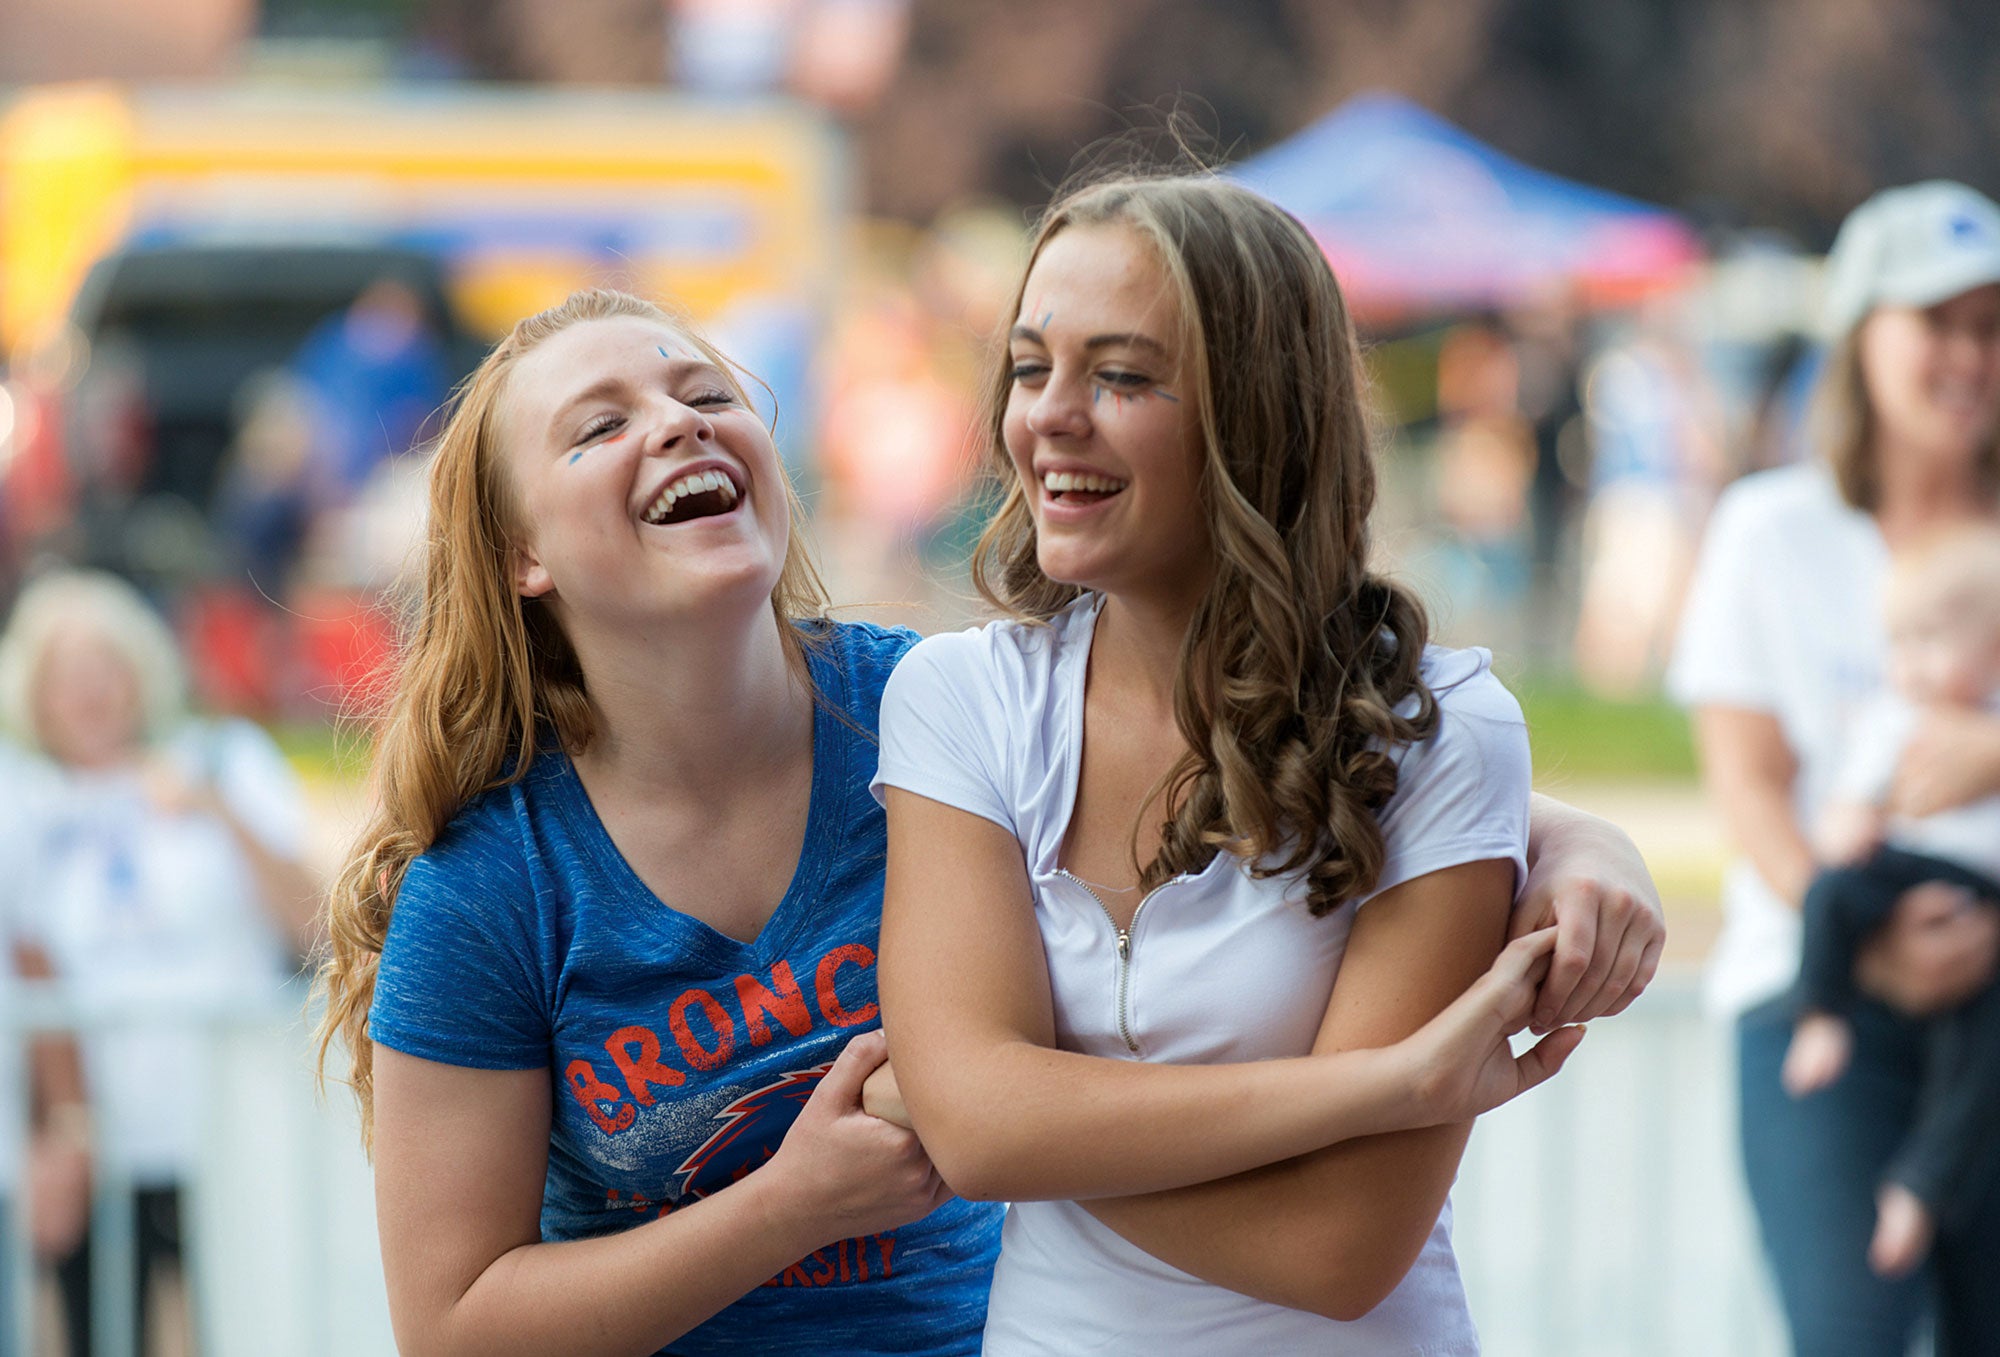 Boise State female graduates hugging each other at a party